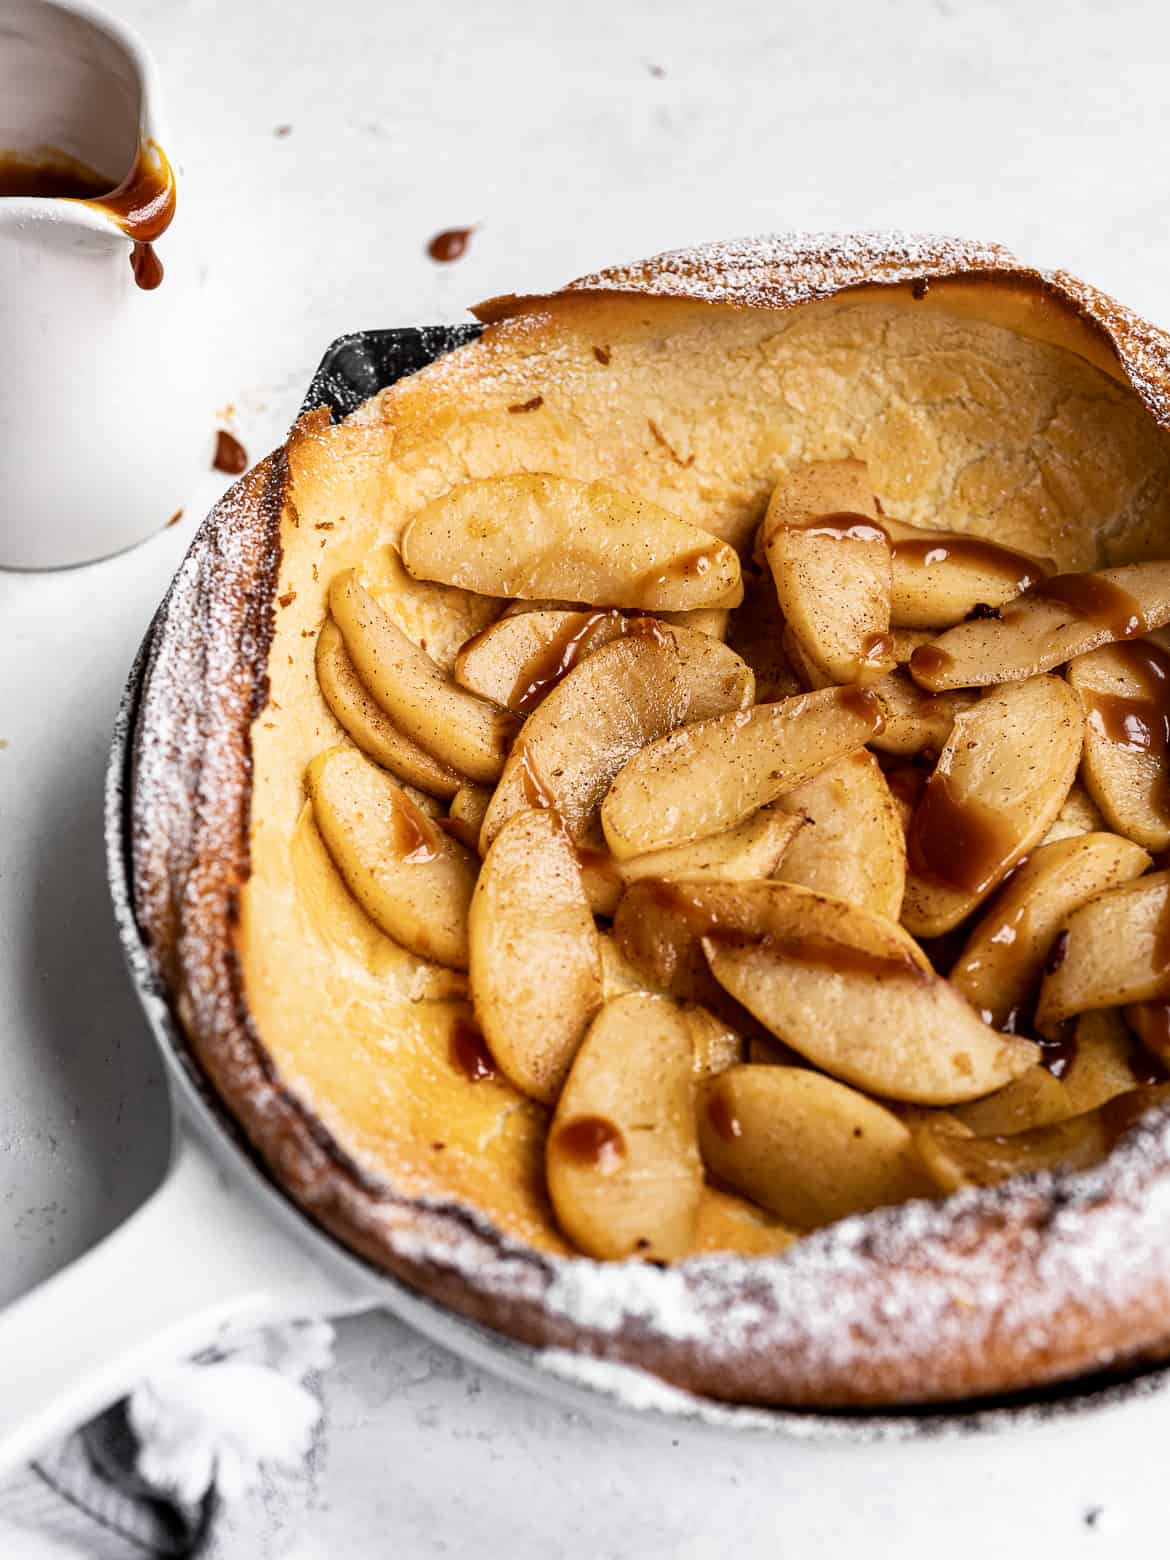 Side view of Dutch baby topped with caramelized apples, icing sugar and caramel drizzle